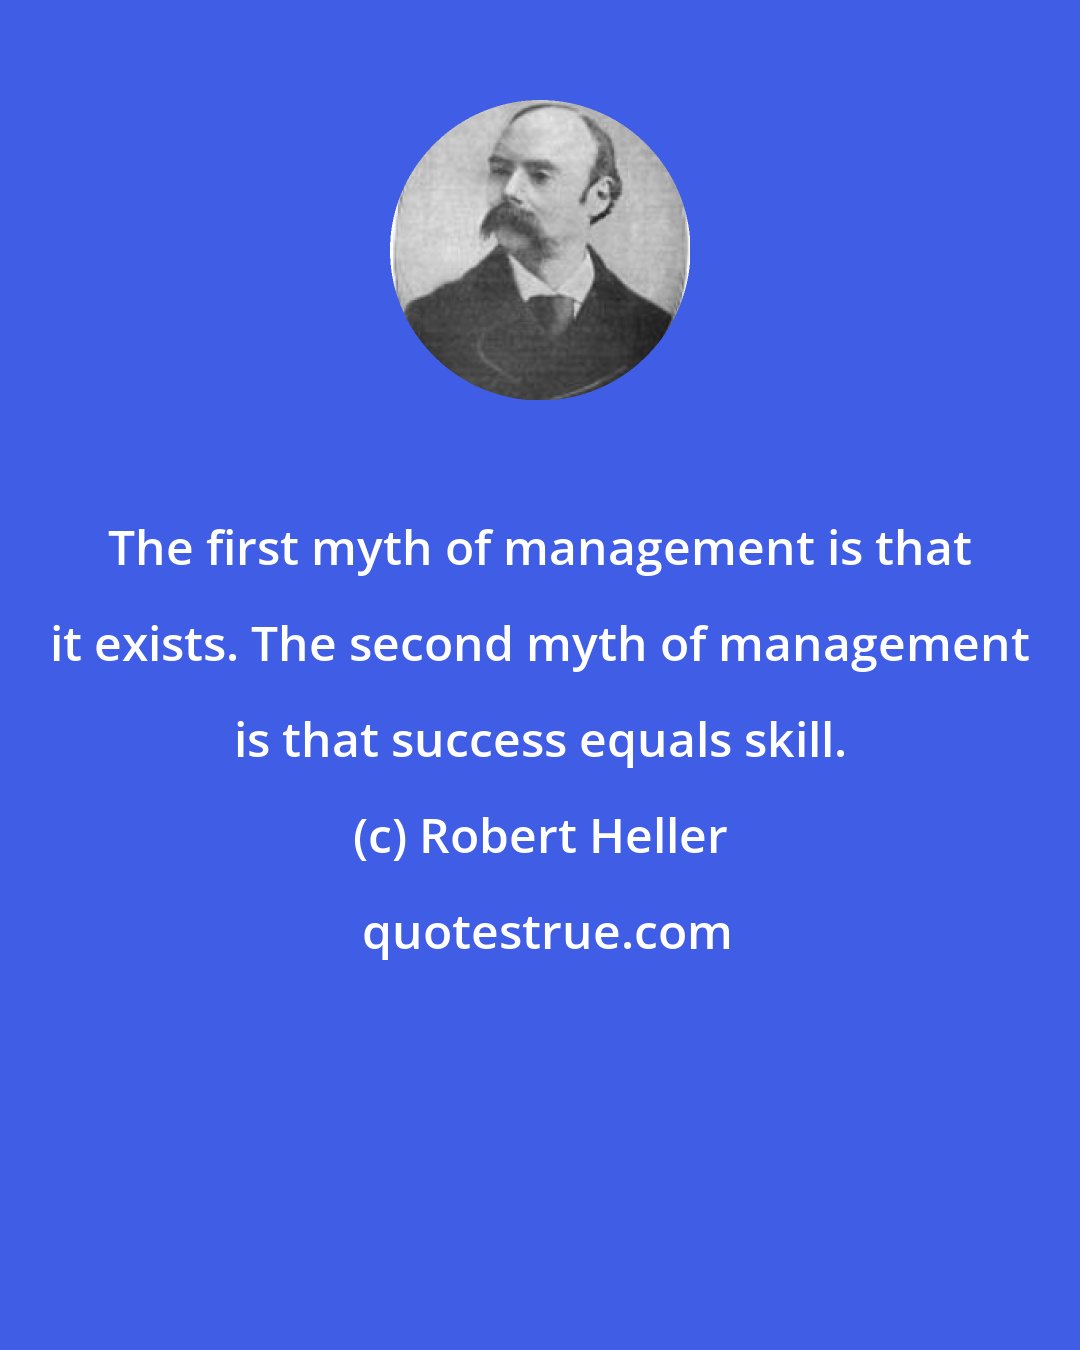 Robert Heller: The first myth of management is that it exists. The second myth of management is that success equals skill.